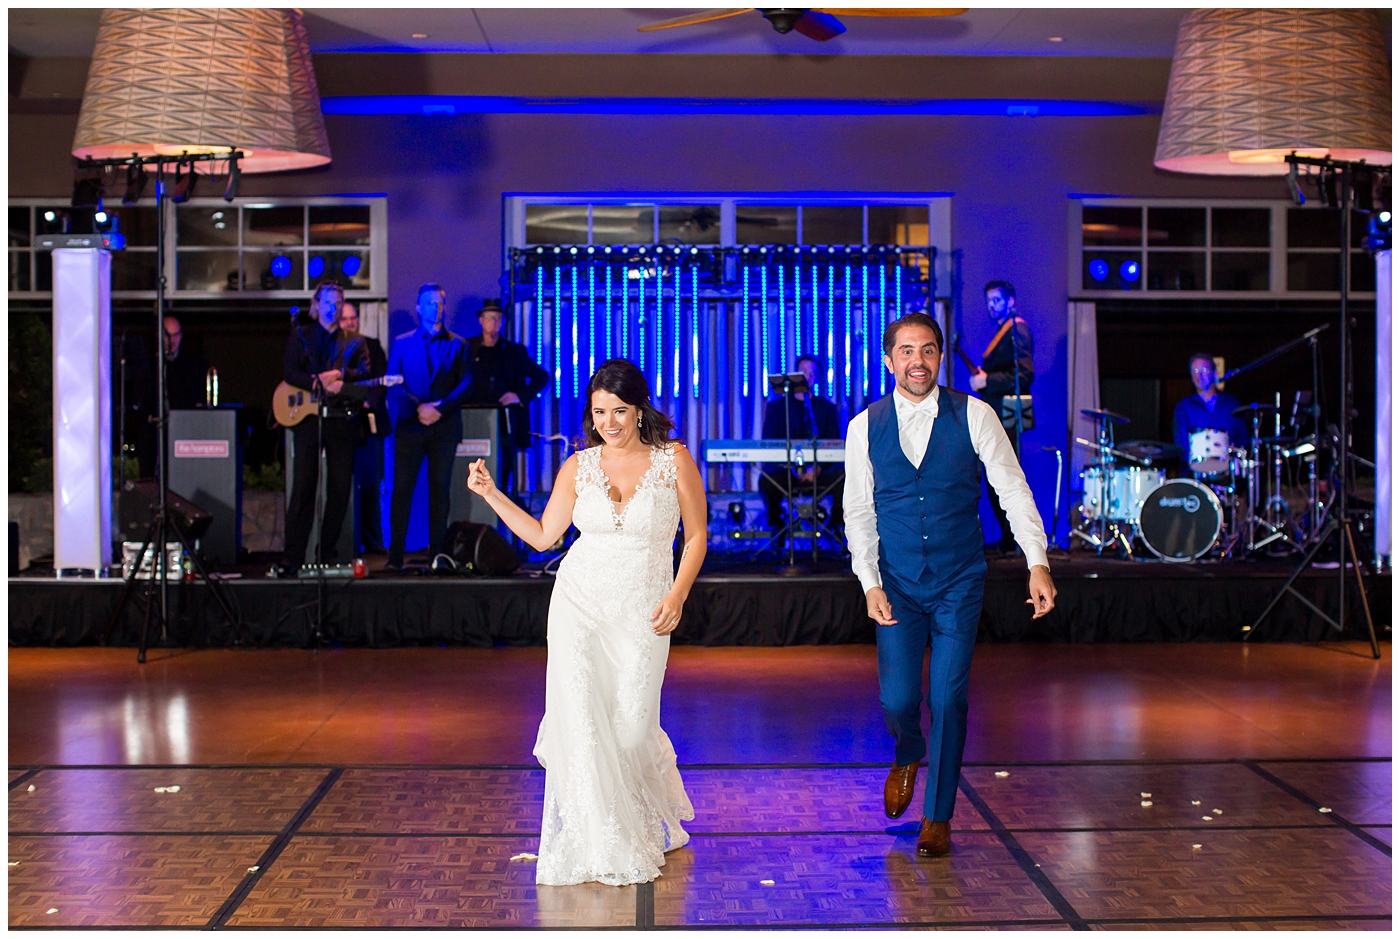 Bride in Justina Alexander dress with groom in custom Brother's Tailors blue suit dancing at their reception